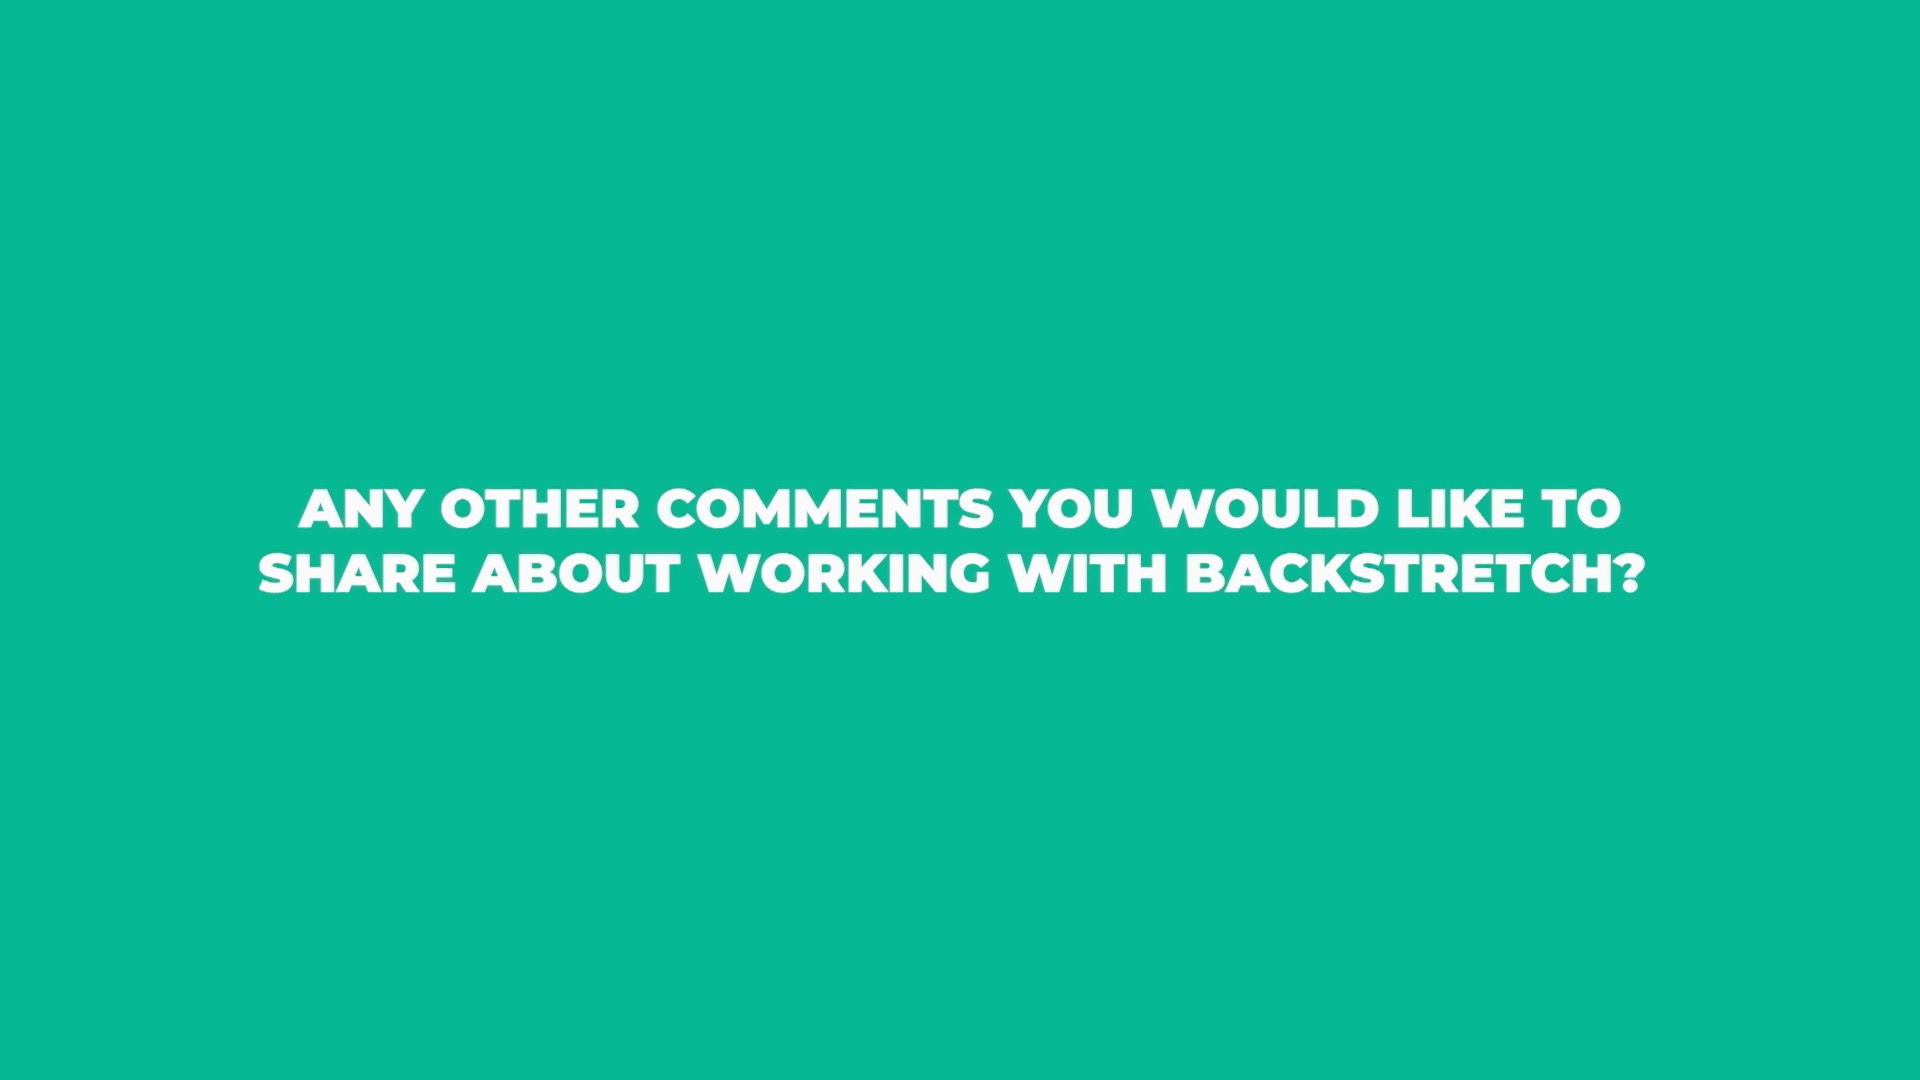 Any other comments you would like to share about working with BackStretch?